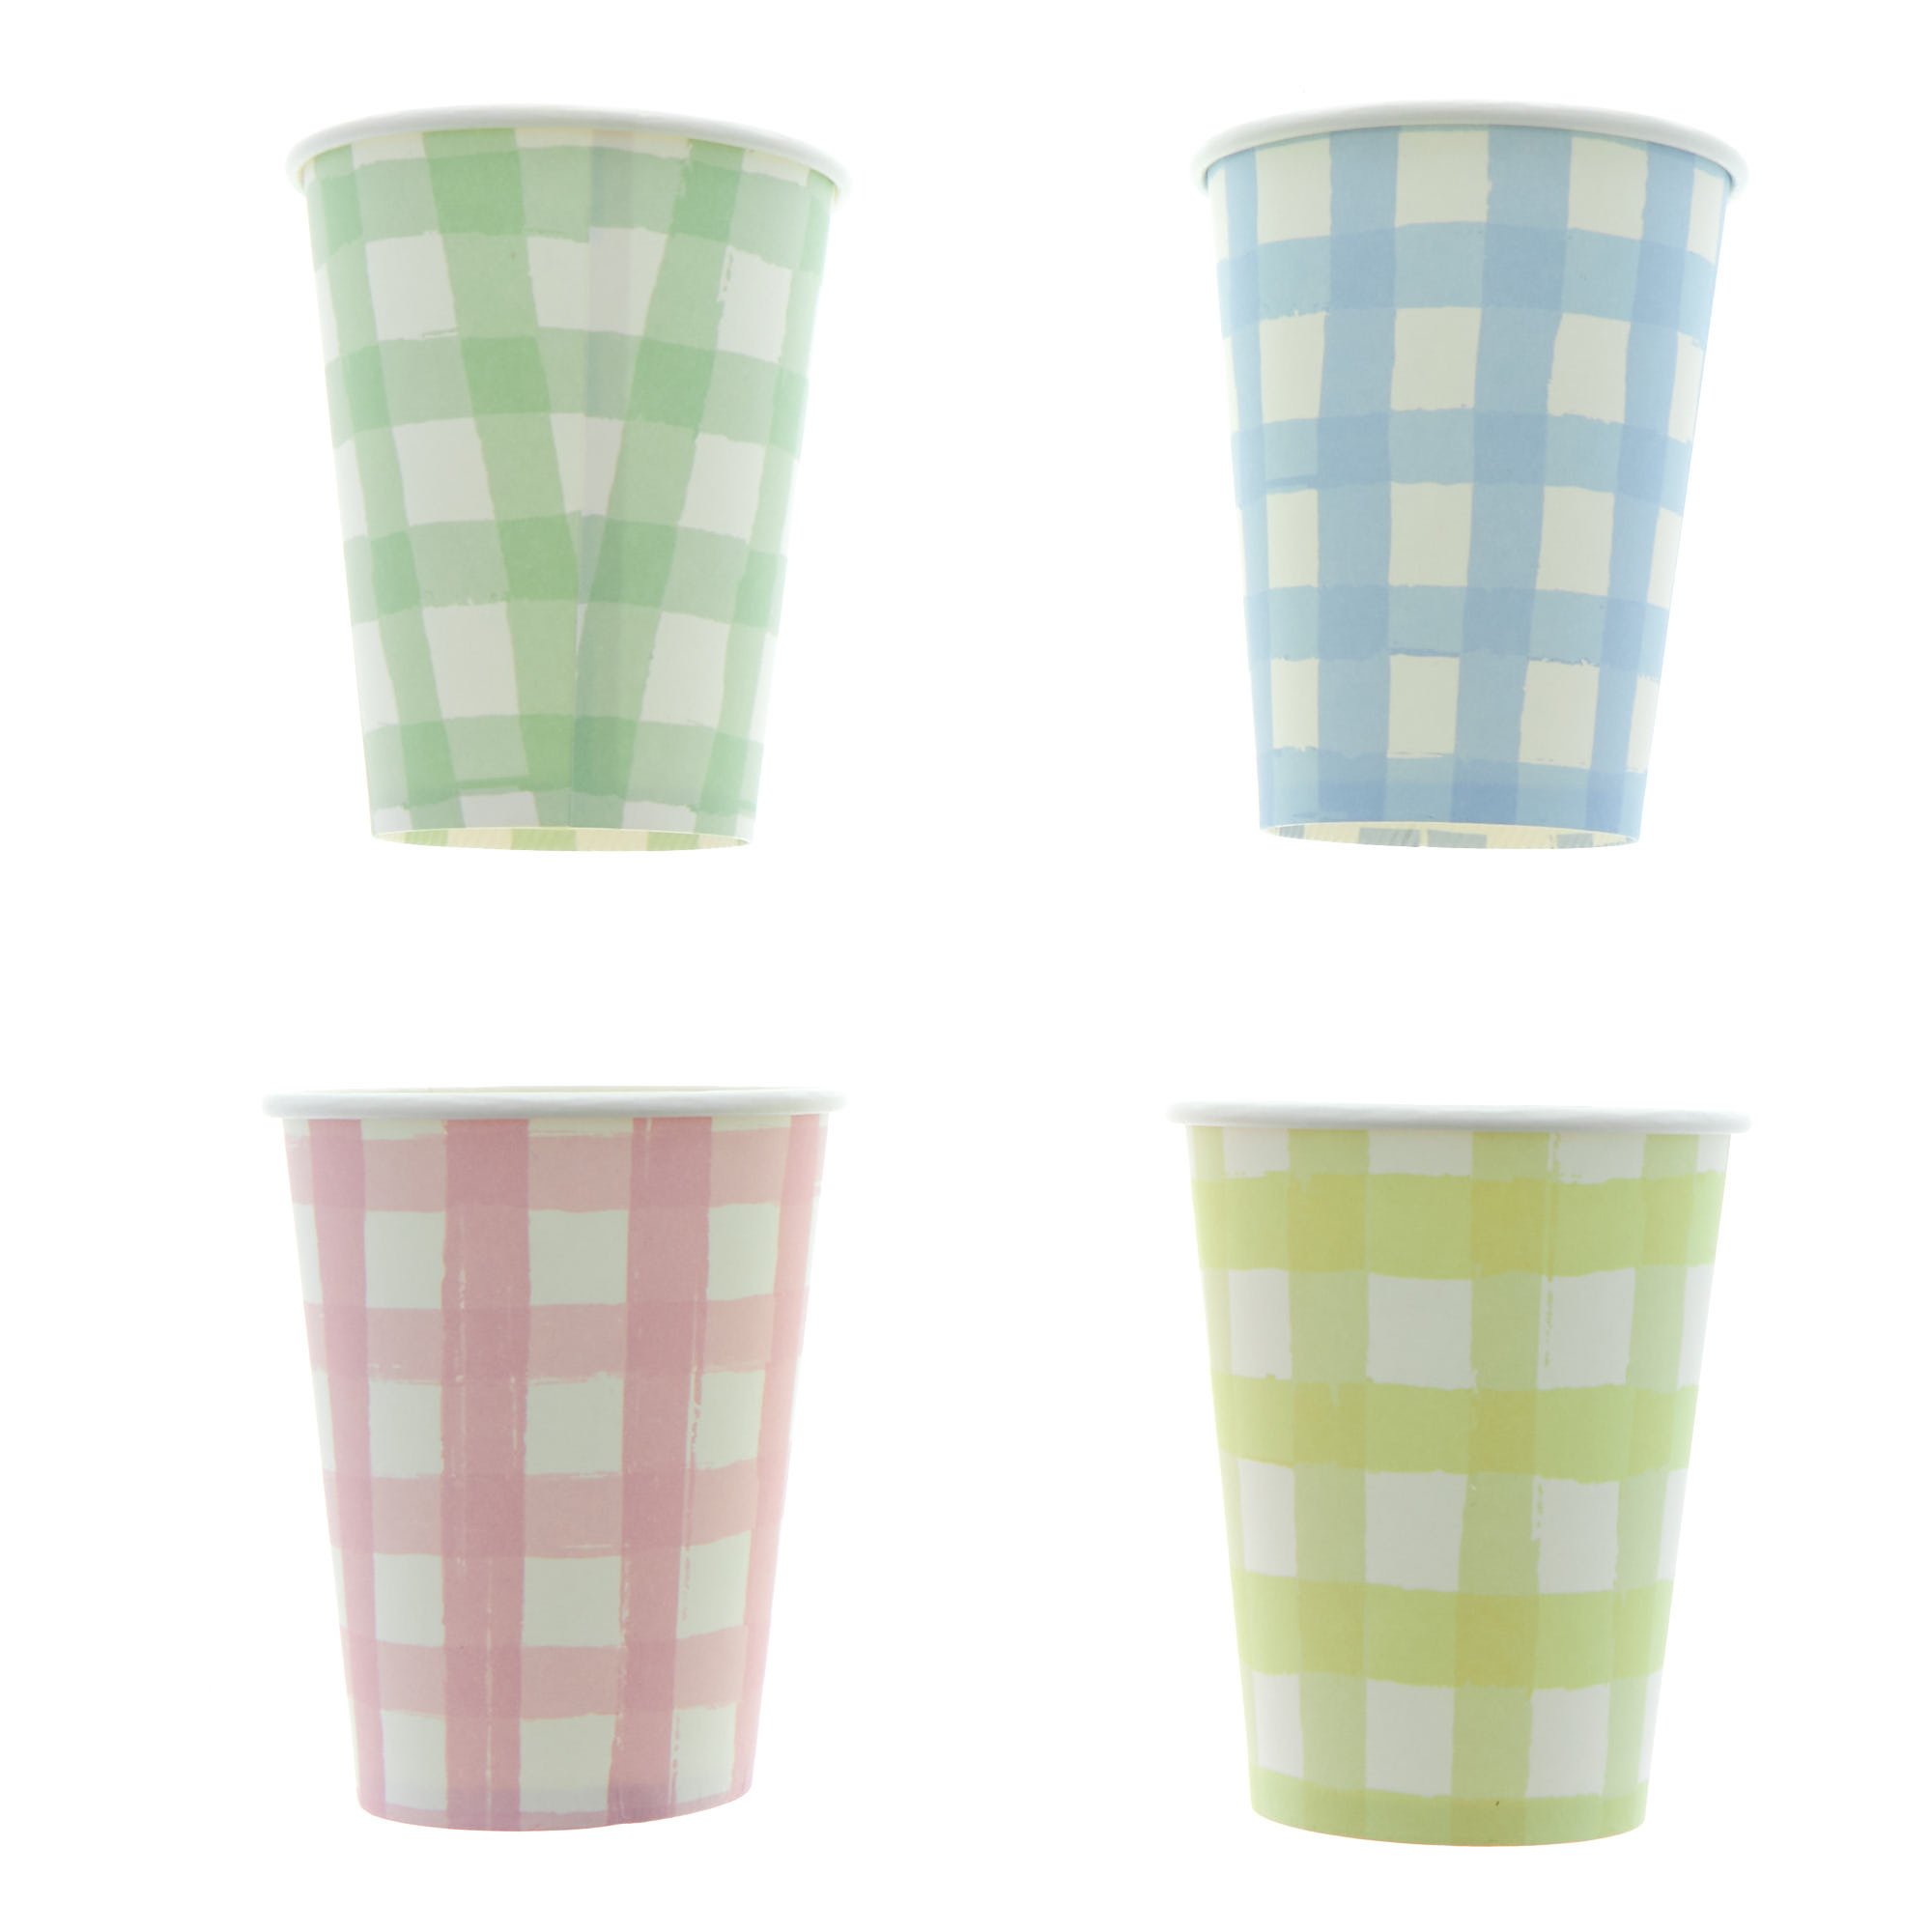 Gingham Picnic Party Tableware & Decorations Bundle - 8 Guests